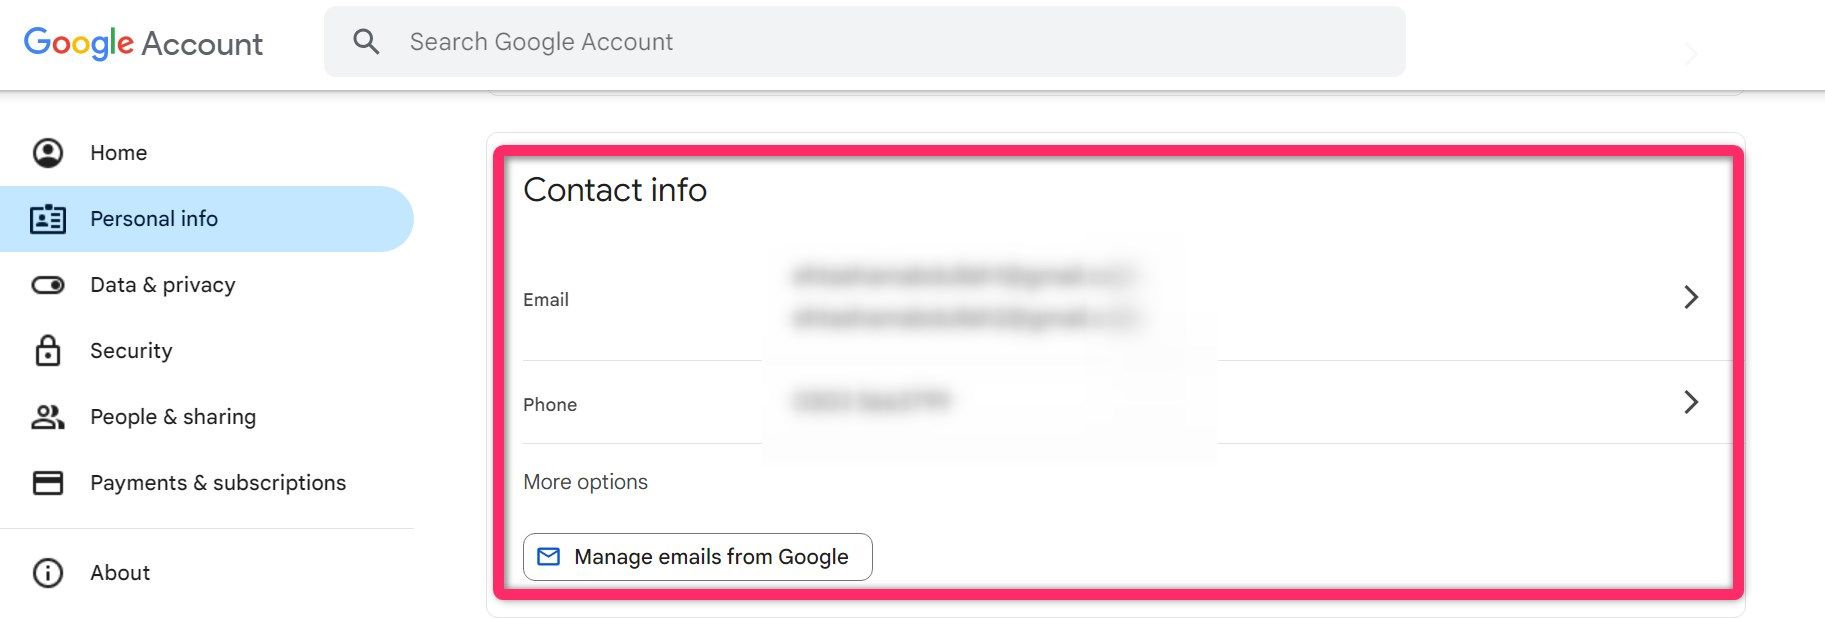 Contact info section in your Google account